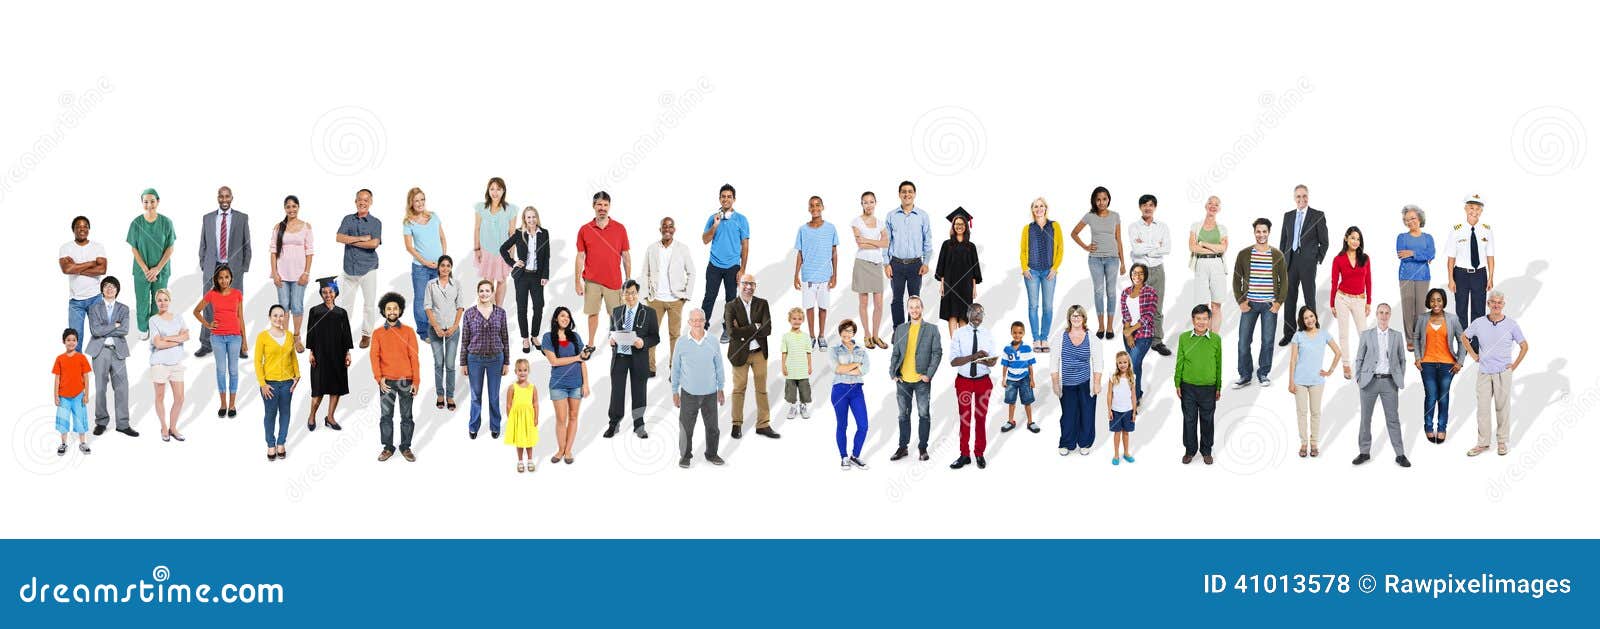 large group of multiethnic people with various occupations